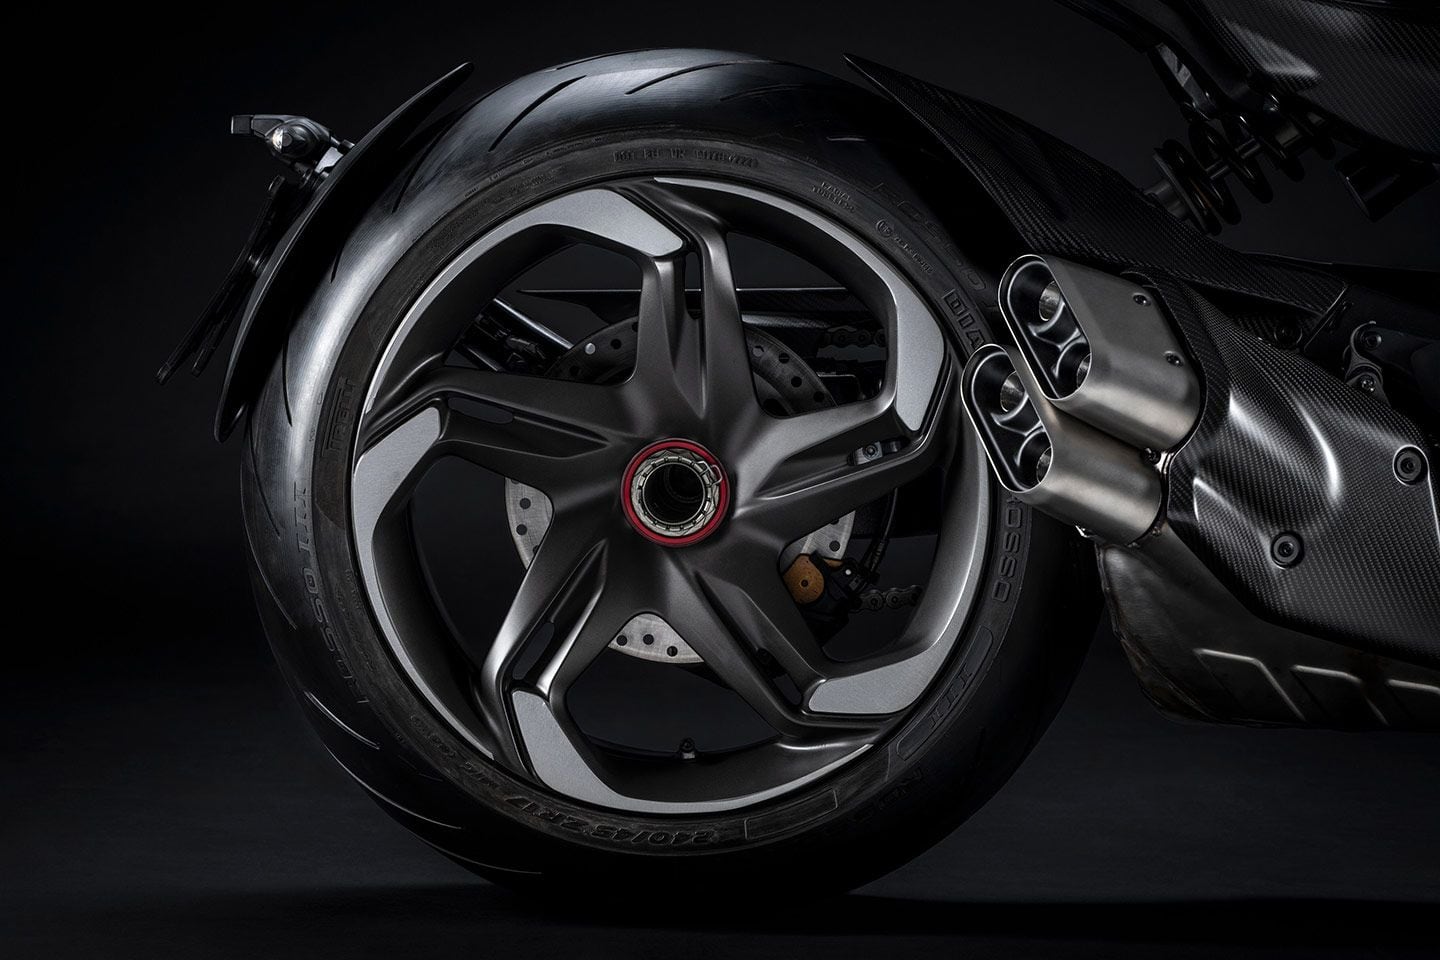 Specially crafted forged rims in Dark Titanium Satin paint were designed specifically for this Diavel.